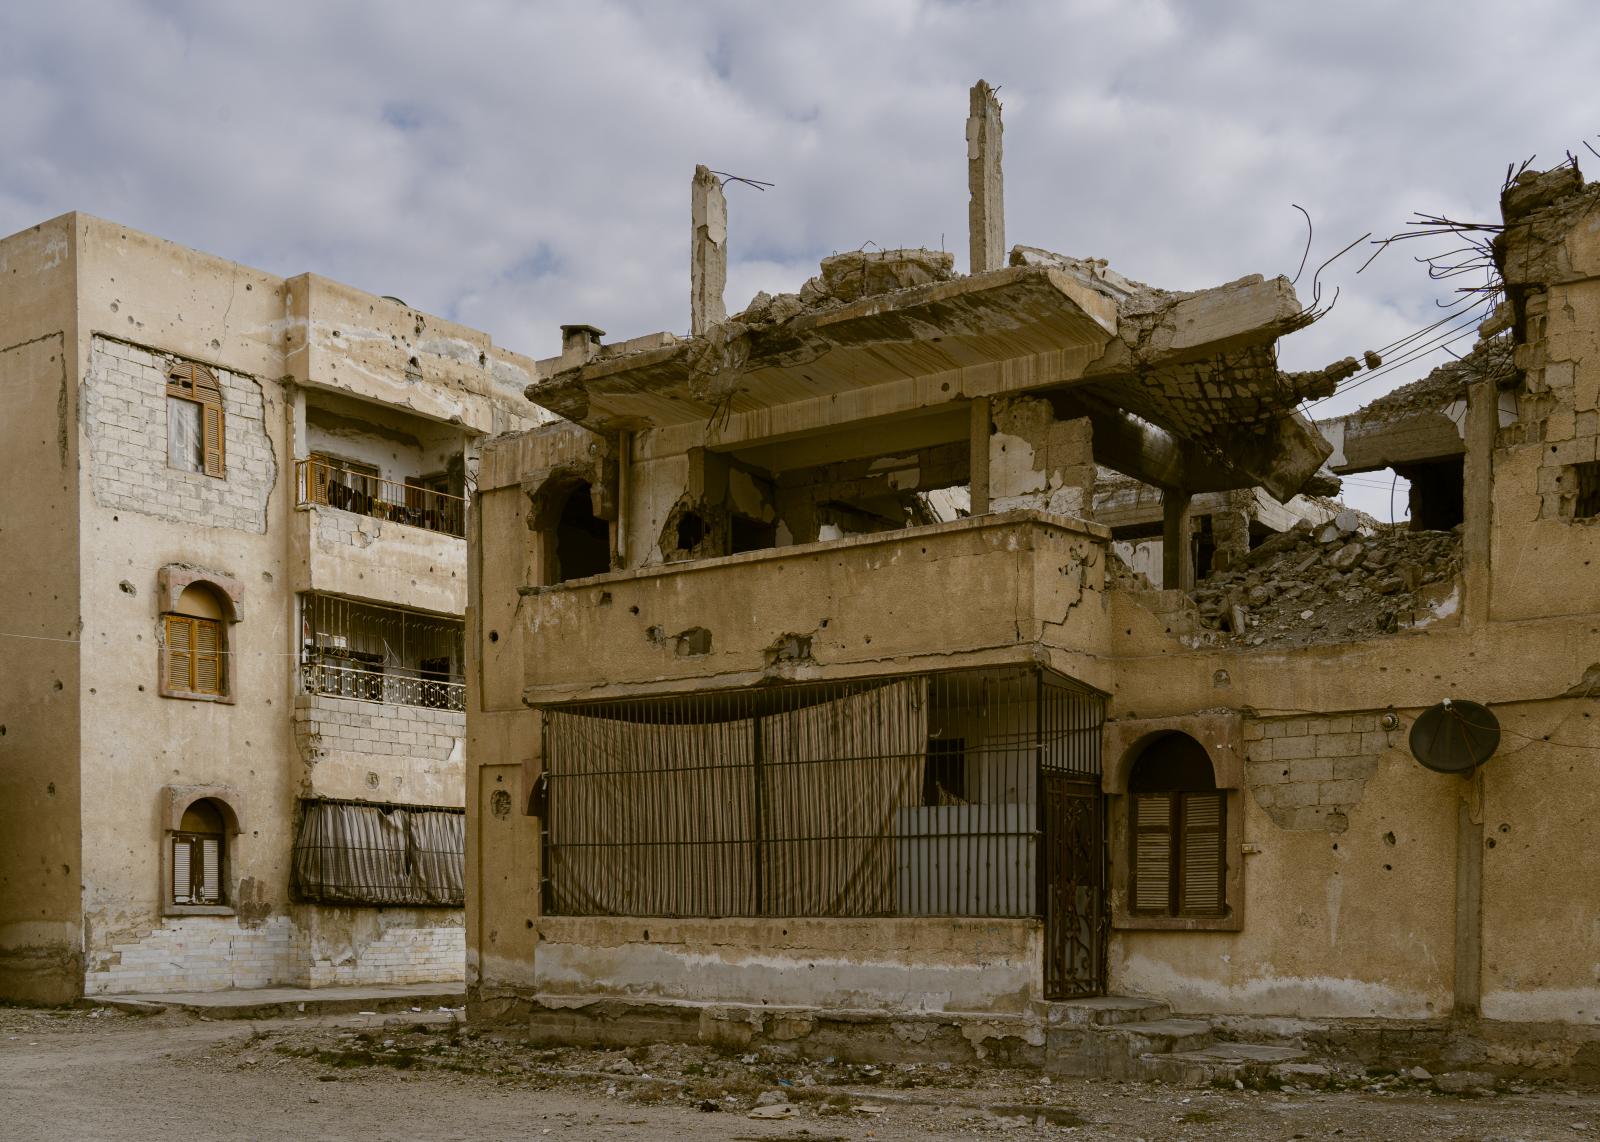 Bombed houses in the &quot;...uses are inhabited again today.